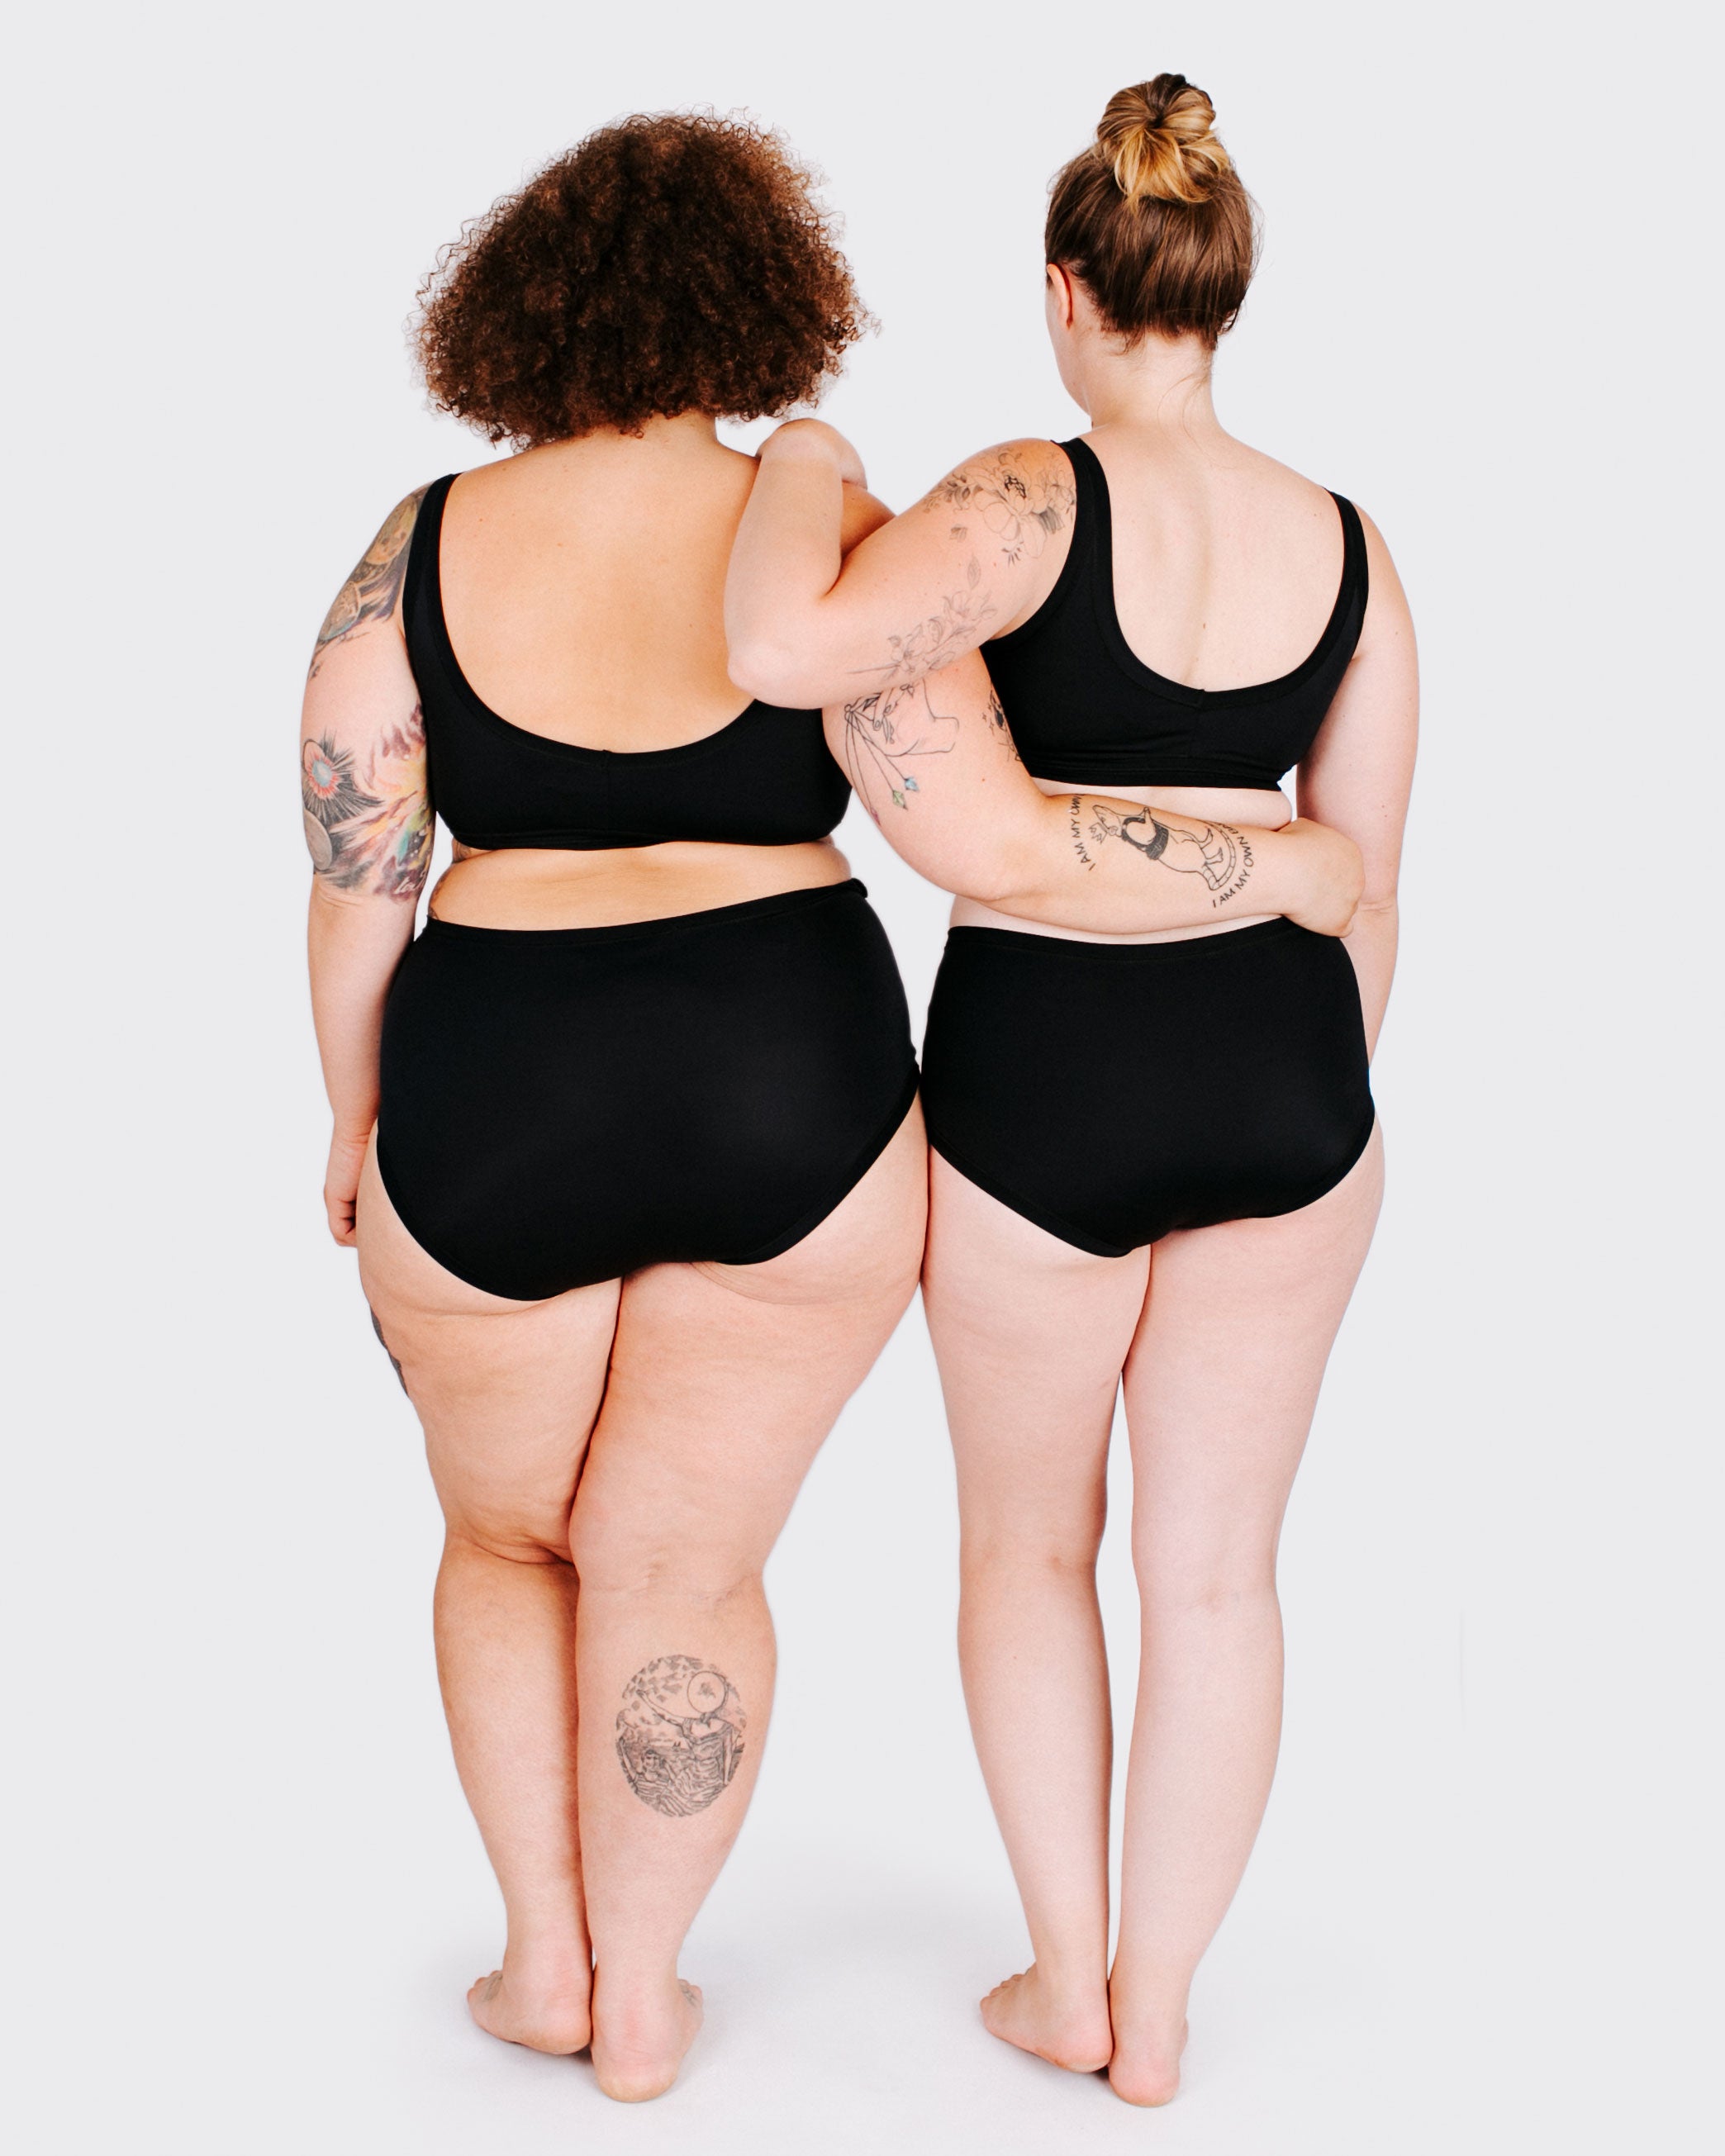 Fit photo from the back of Thunderpants recycled nylon Swimwear Original style bottoms and Swimwear Top in Plain Black on two models standing together.